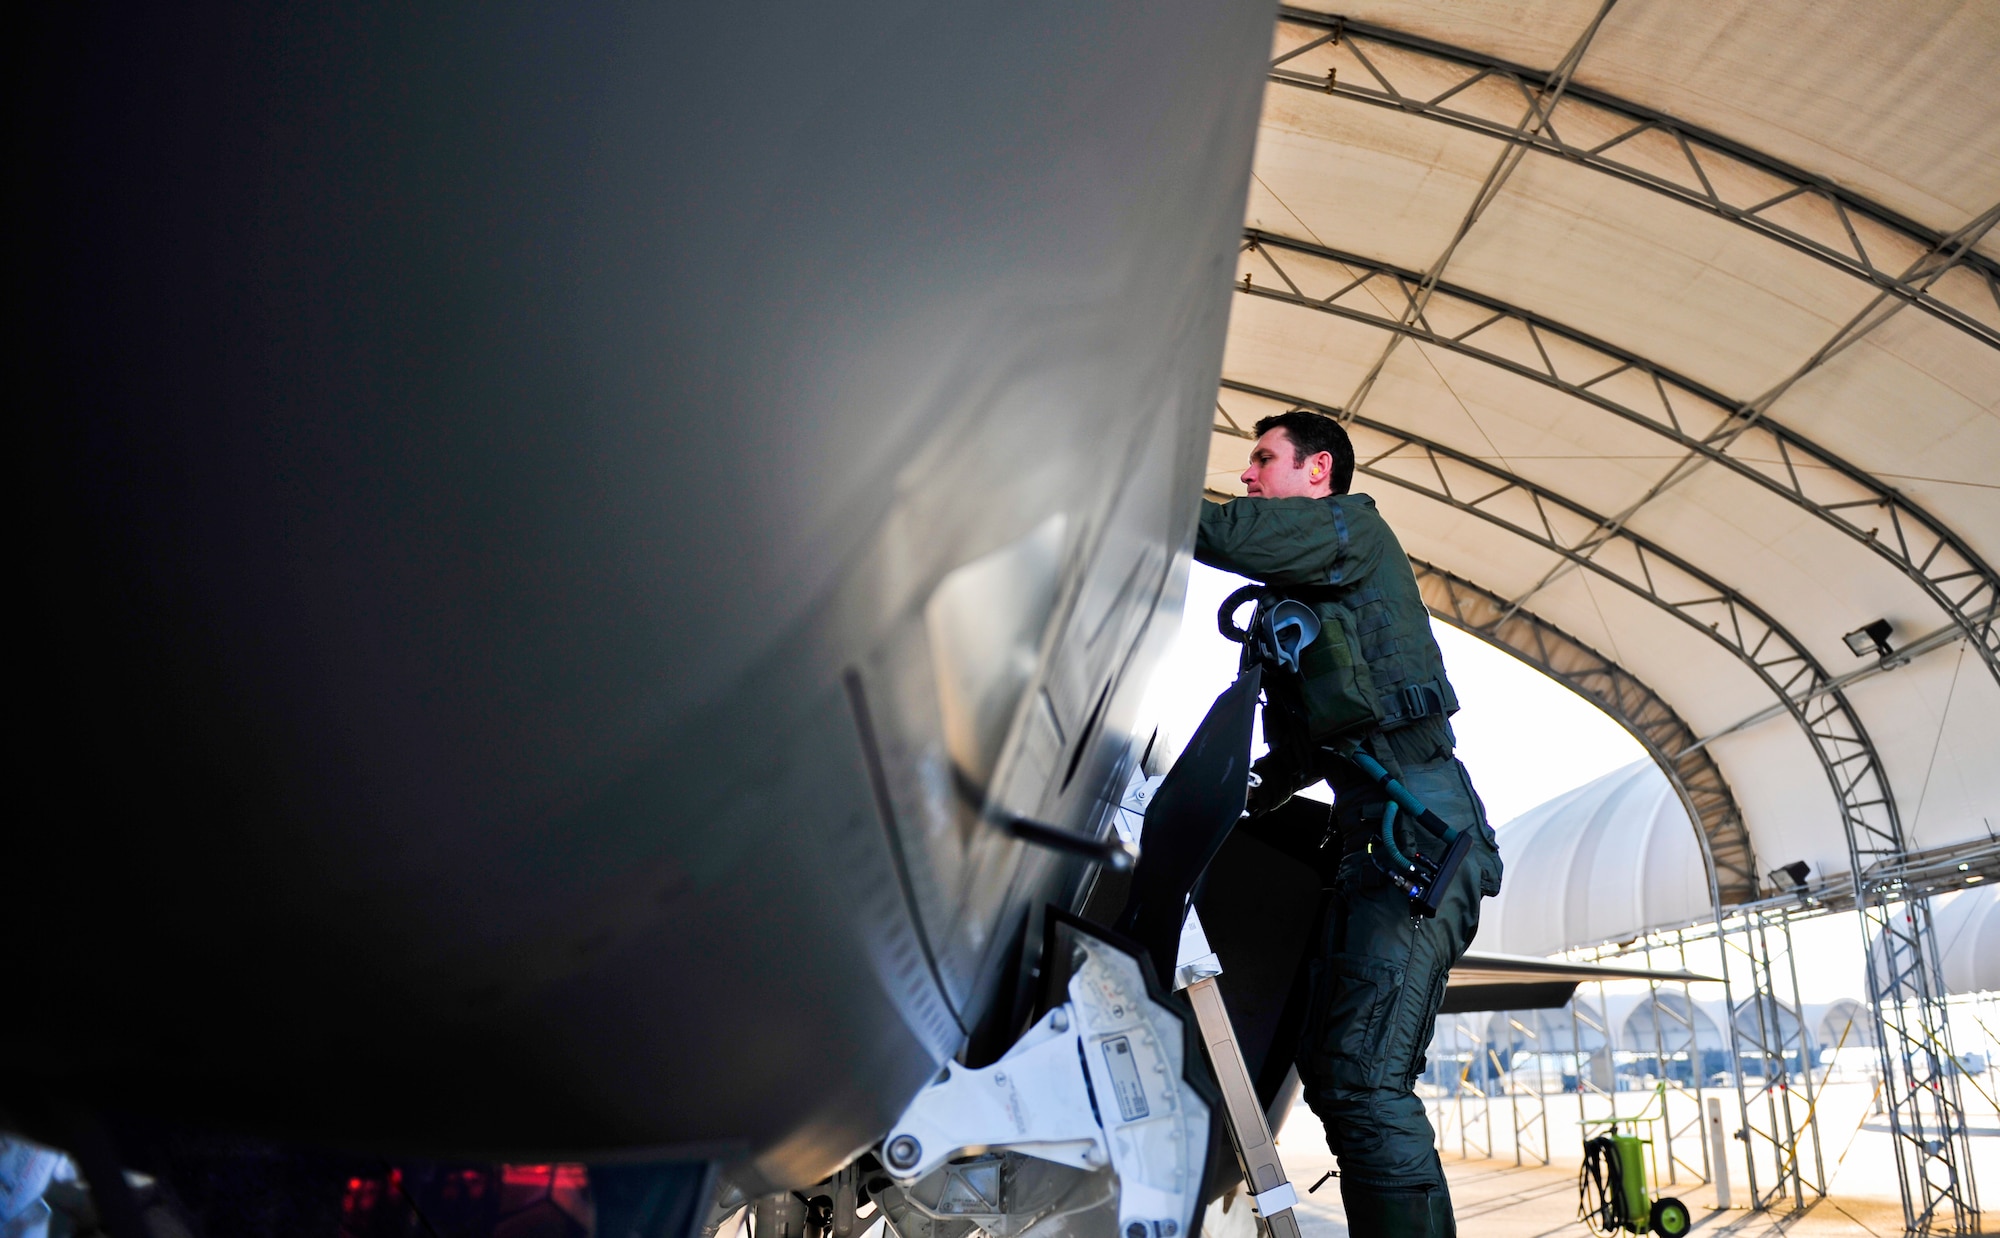 Royal Australian Air Force Squadron Leader Andrew Jackson, F-35 Lightning II student pilot, climbs into an F-35A before his first flight on Eglin Air Force Base, Fla., March 18, 2015. Jackson arrived in the United States in December 2014 and started his training at the F-35 Academic Training Center on Jan. 26, Australia Day. Since then, Jackson has completed 154 classroom hours and 64 hours throughout 16 flight simulations, before stepping to his first aircraft. (U.S. Air Force photo/Staff Sgt. Marleah Robertson)